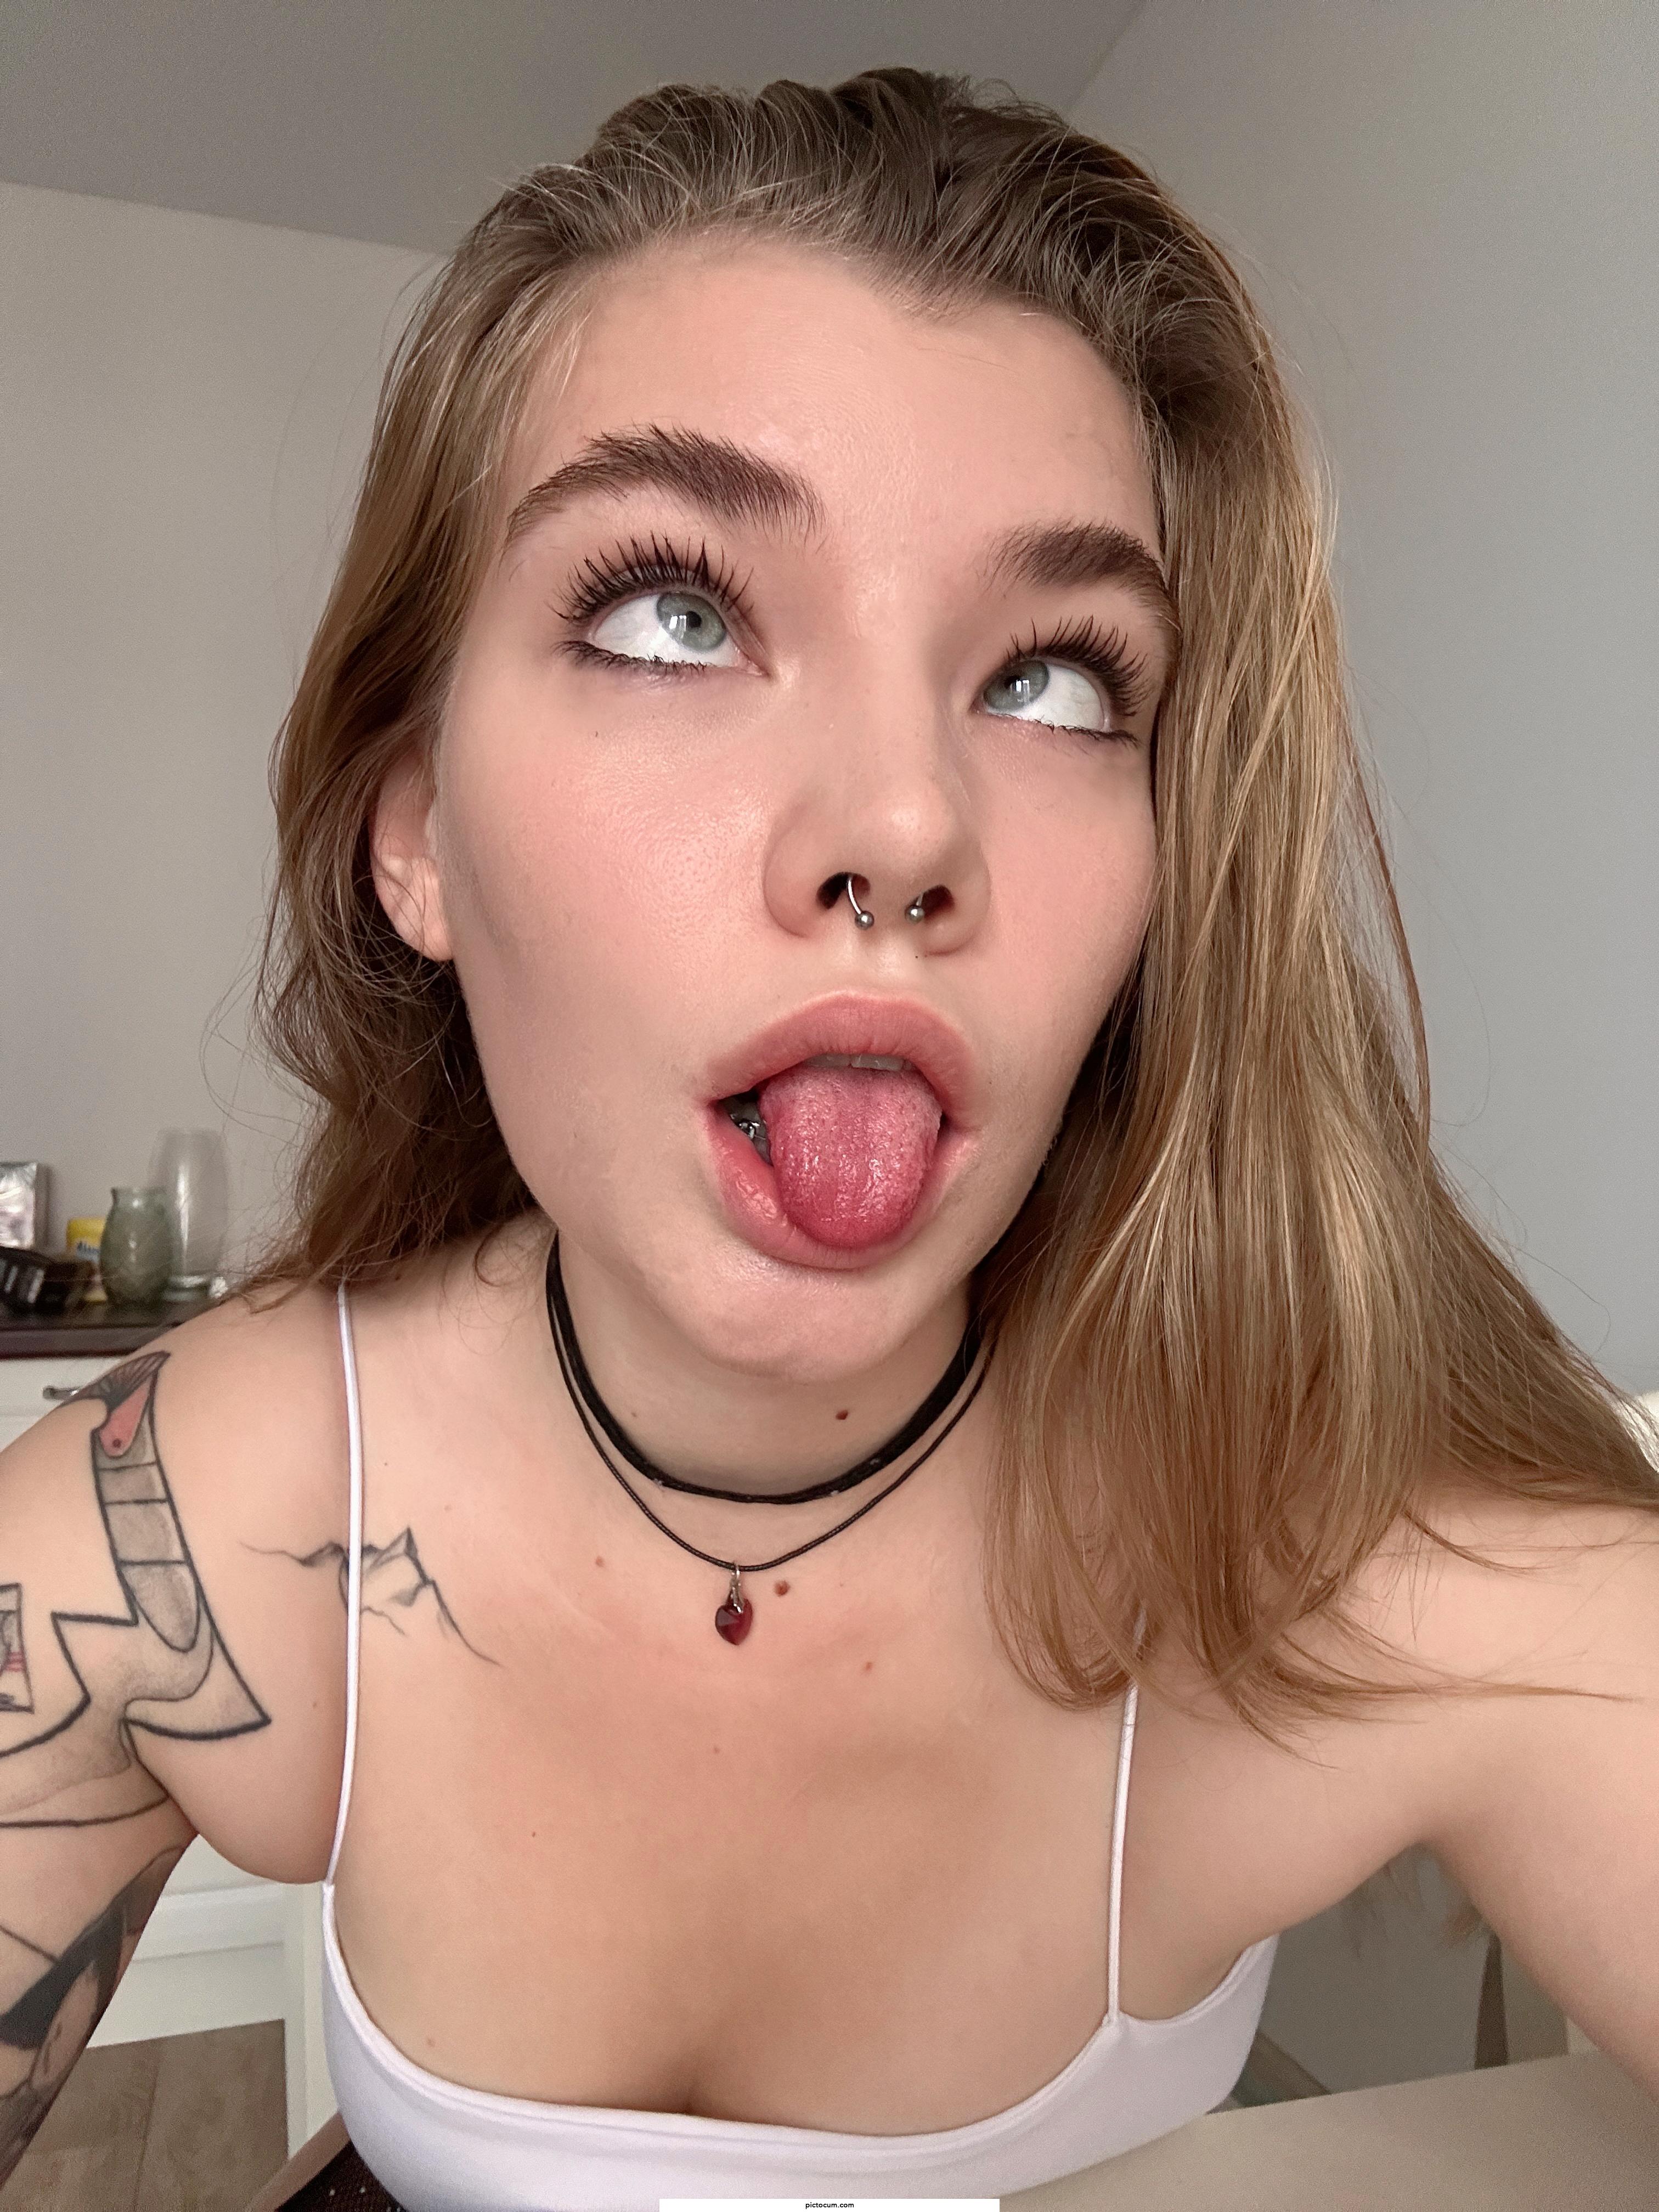 my face was made for ahegao, wasn't it